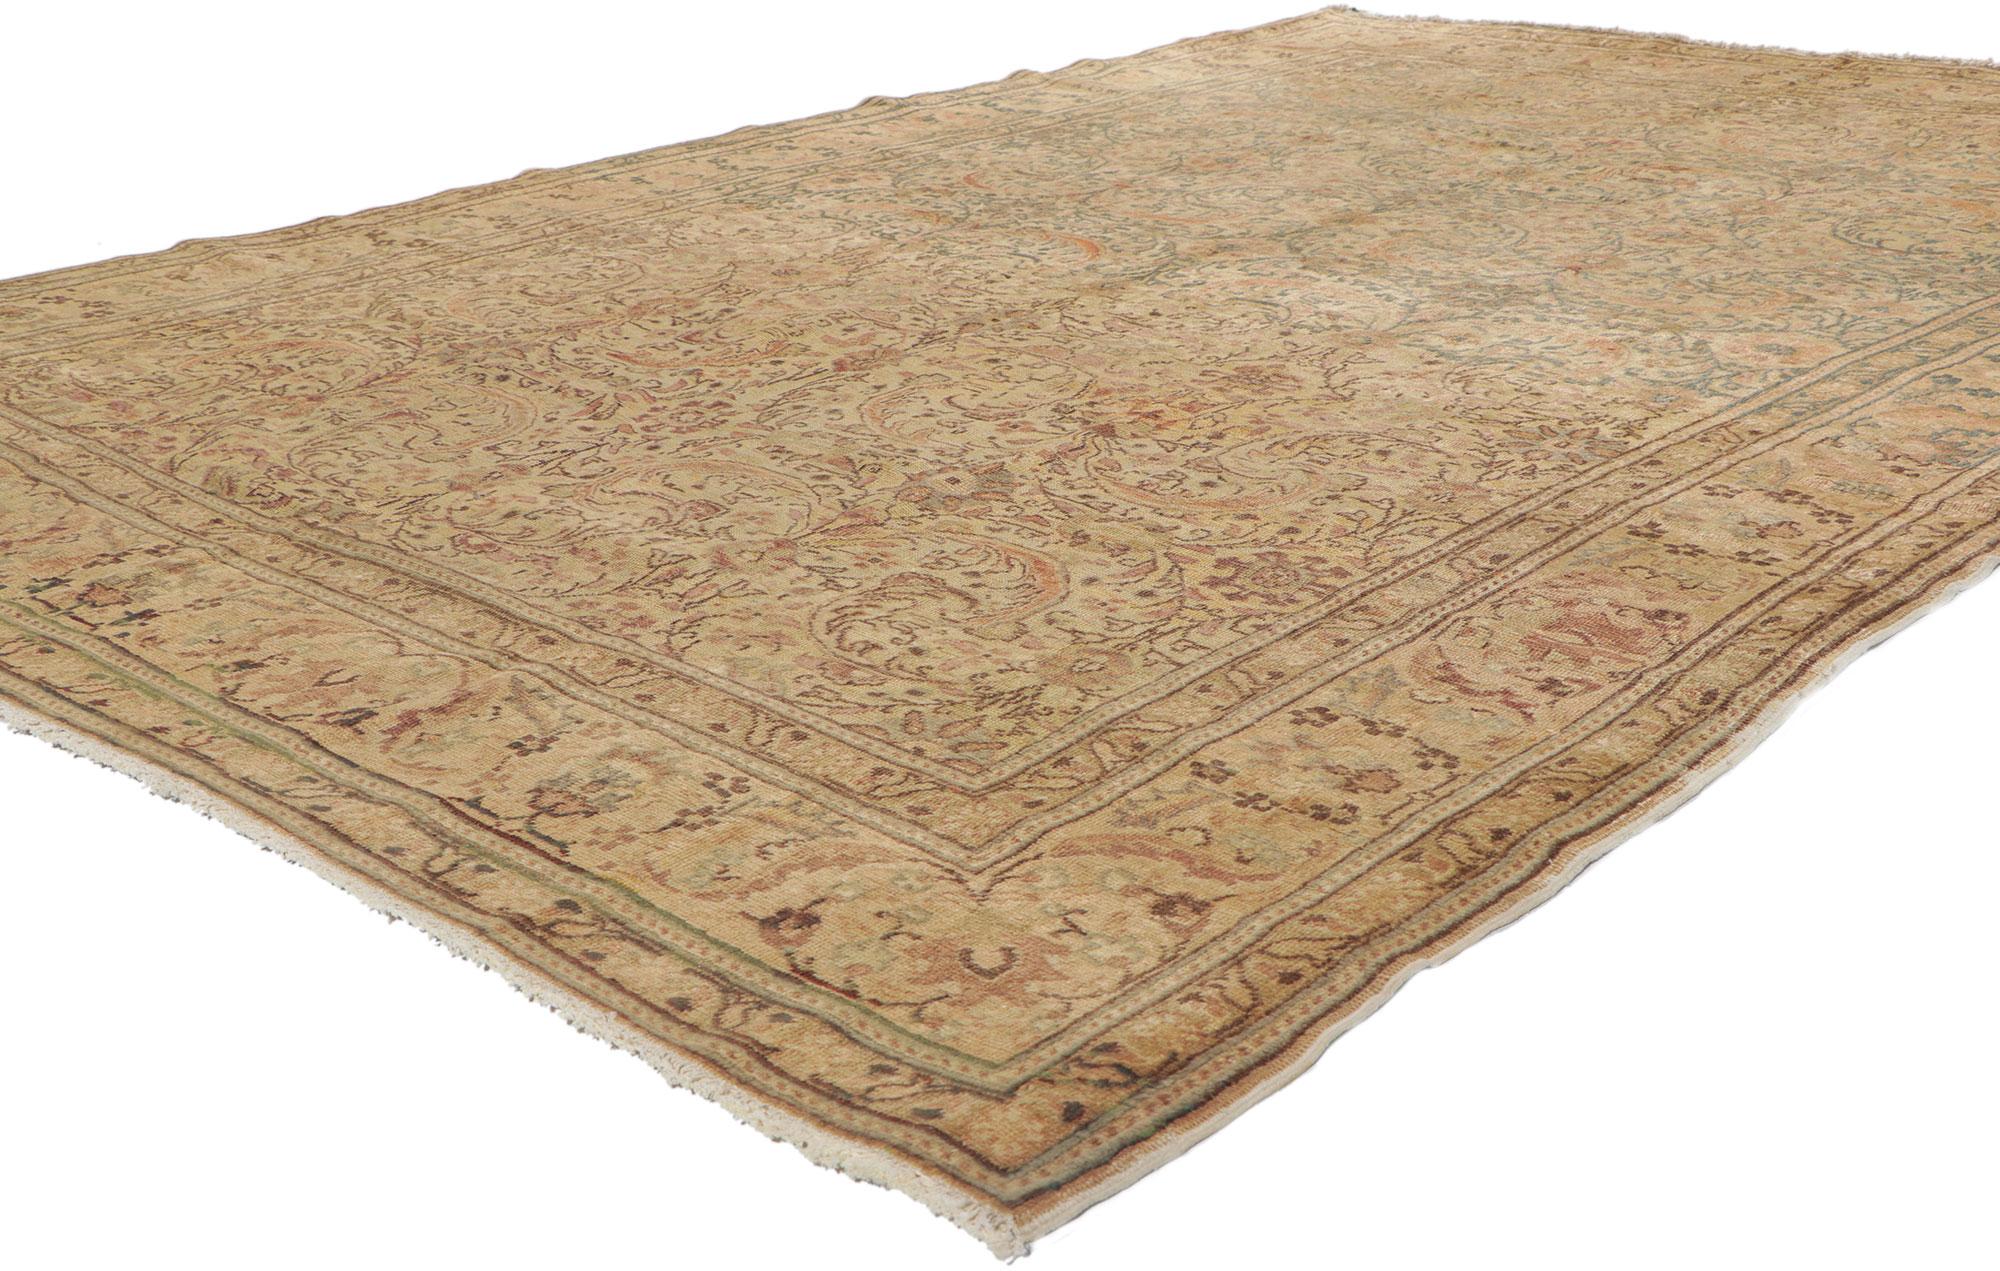 73149 Vintage Turkish Sivas Rug, 06'04 X 09'03. 
This hand-knotted wool vintage Turkish Sivas rug features an all-over Herati pattern spread across an abrashed cream field. The classic Herati pattern, also known as the Mahi or Fish pattern, is